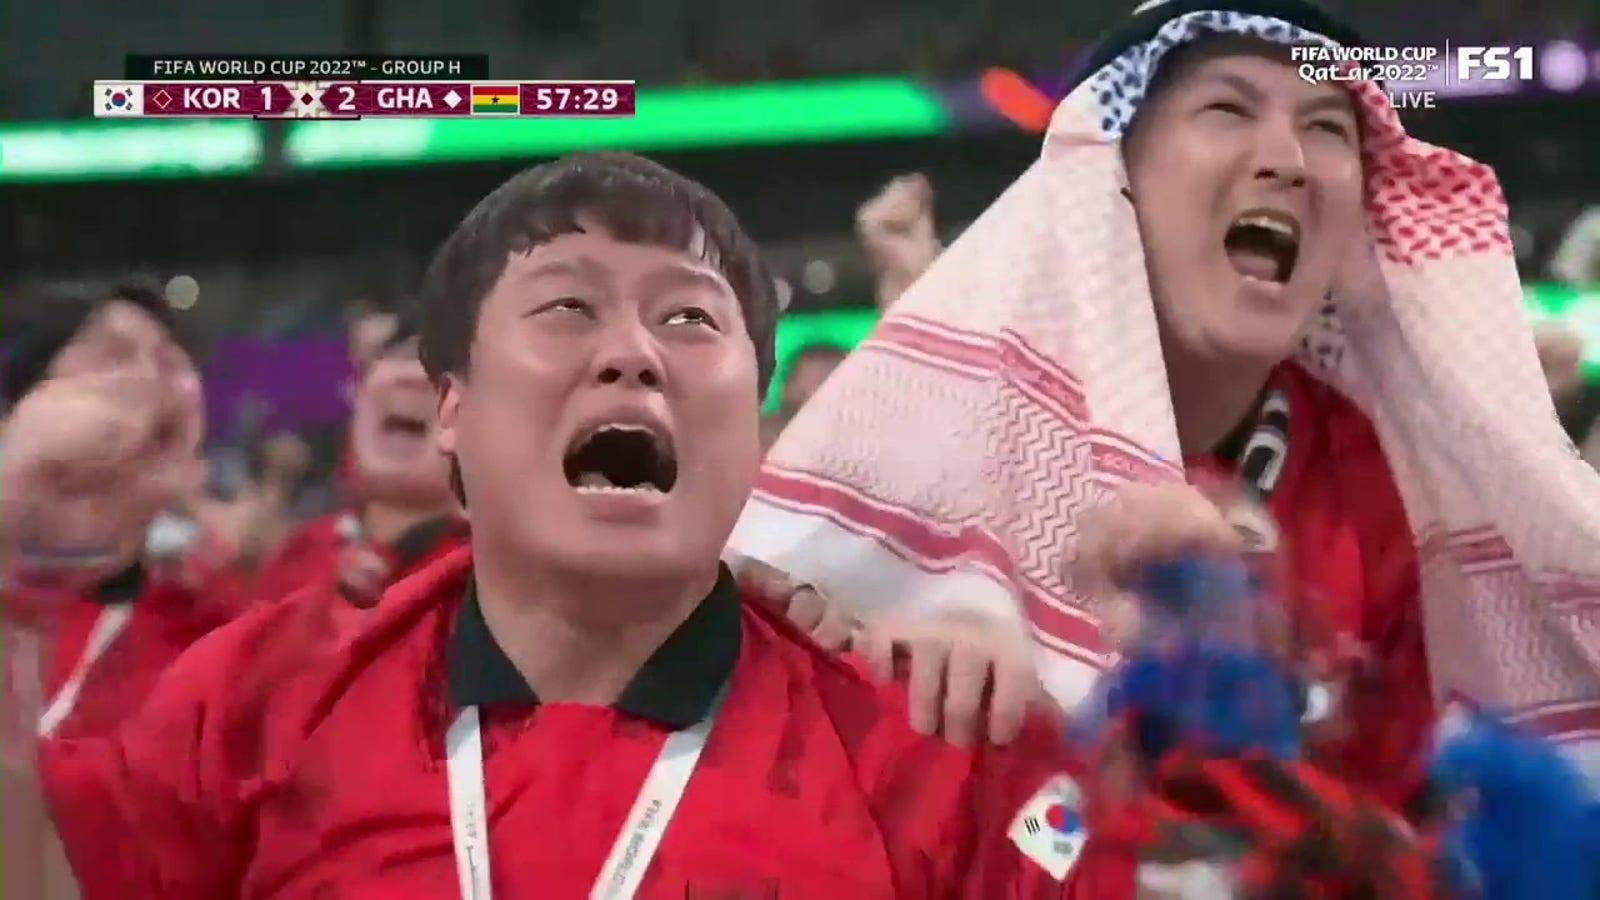 South Korea's Cho Goe-sung scores in the 58th minute against Ghana | 2022 FIFA World Cup